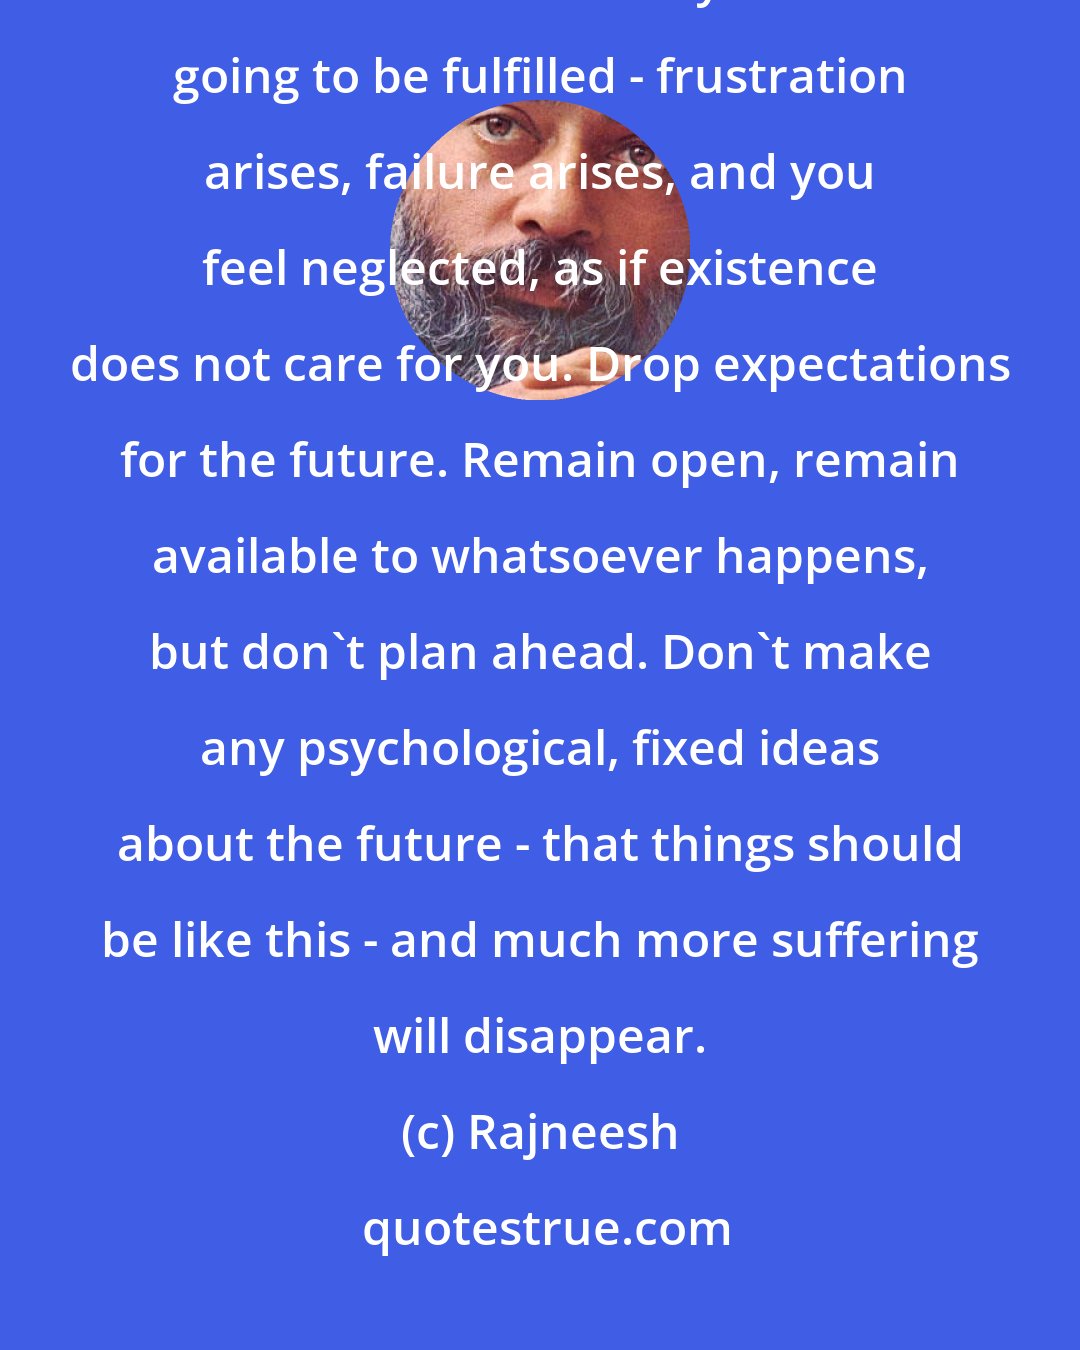 Rajneesh: The real thing is that you are suffering from your expectations. When they are not fulfilled - and they are never going to be fulfilled - frustration arises, failure arises, and you feel neglected, as if existence does not care for you. Drop expectations for the future. Remain open, remain available to whatsoever happens, but don't plan ahead. Don't make any psychological, fixed ideas about the future - that things should be like this - and much more suffering will disappear.